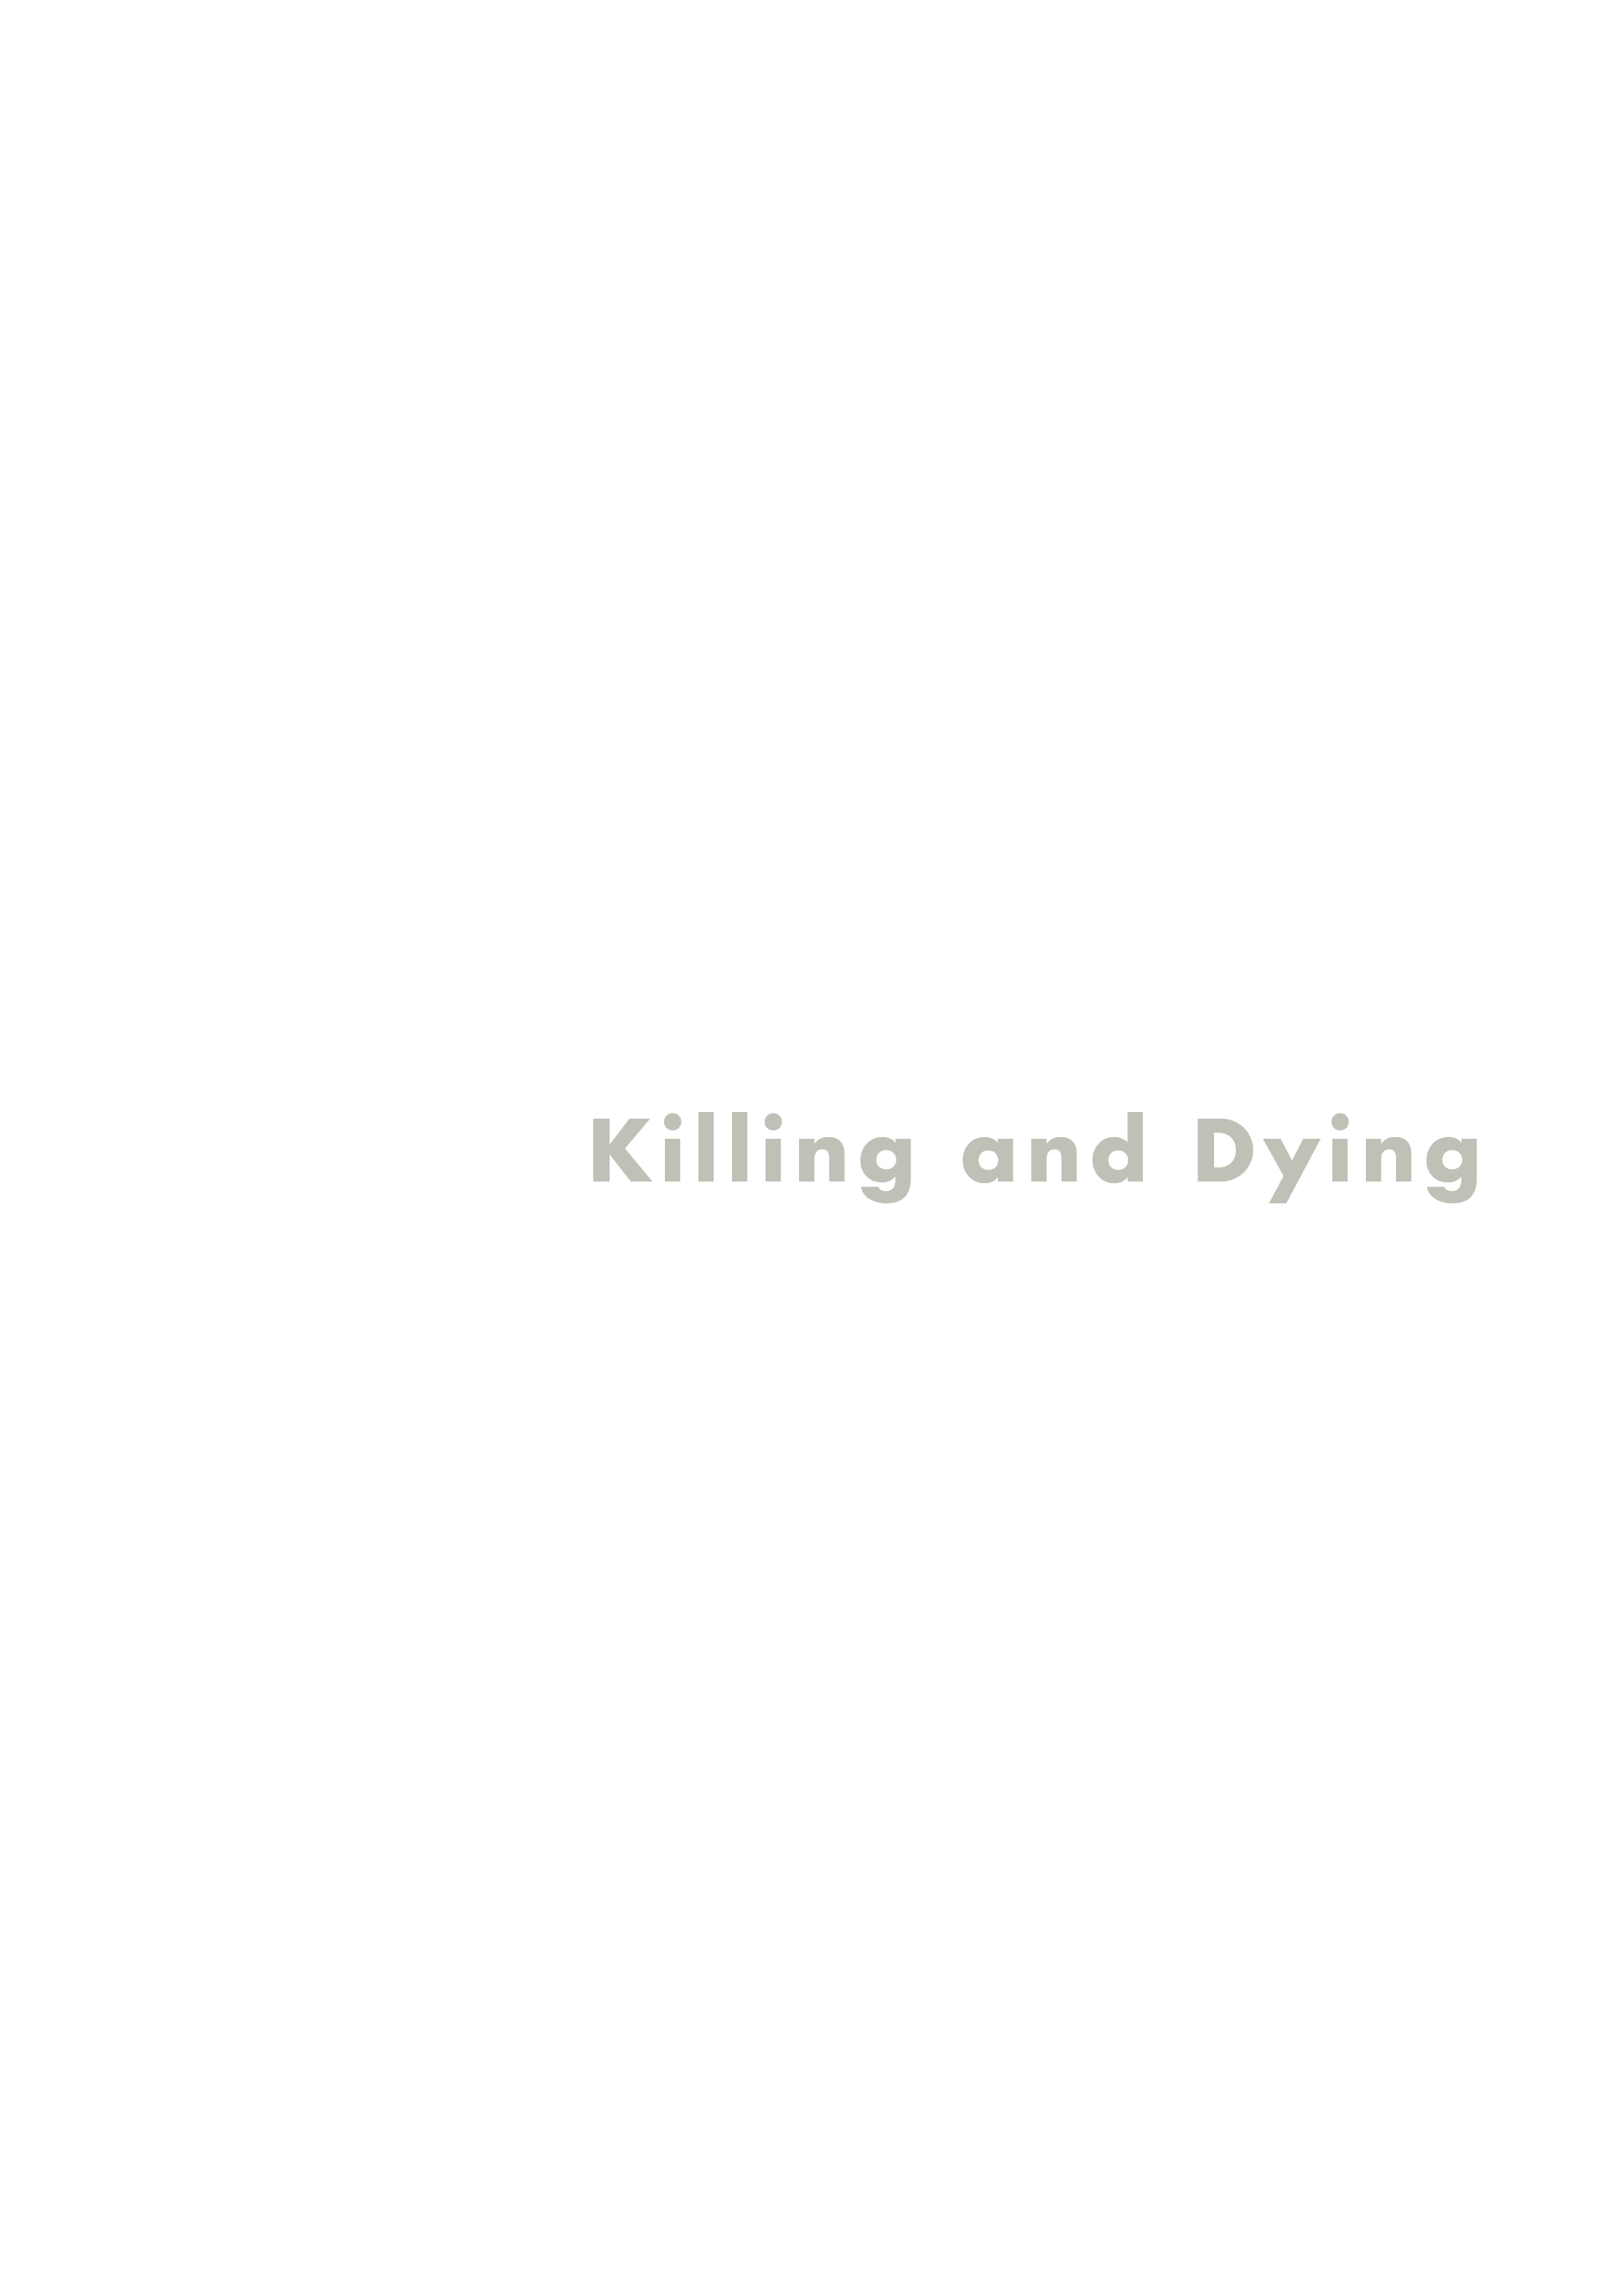 Read online Killing and Dying comic -  Issue # TPB - 3